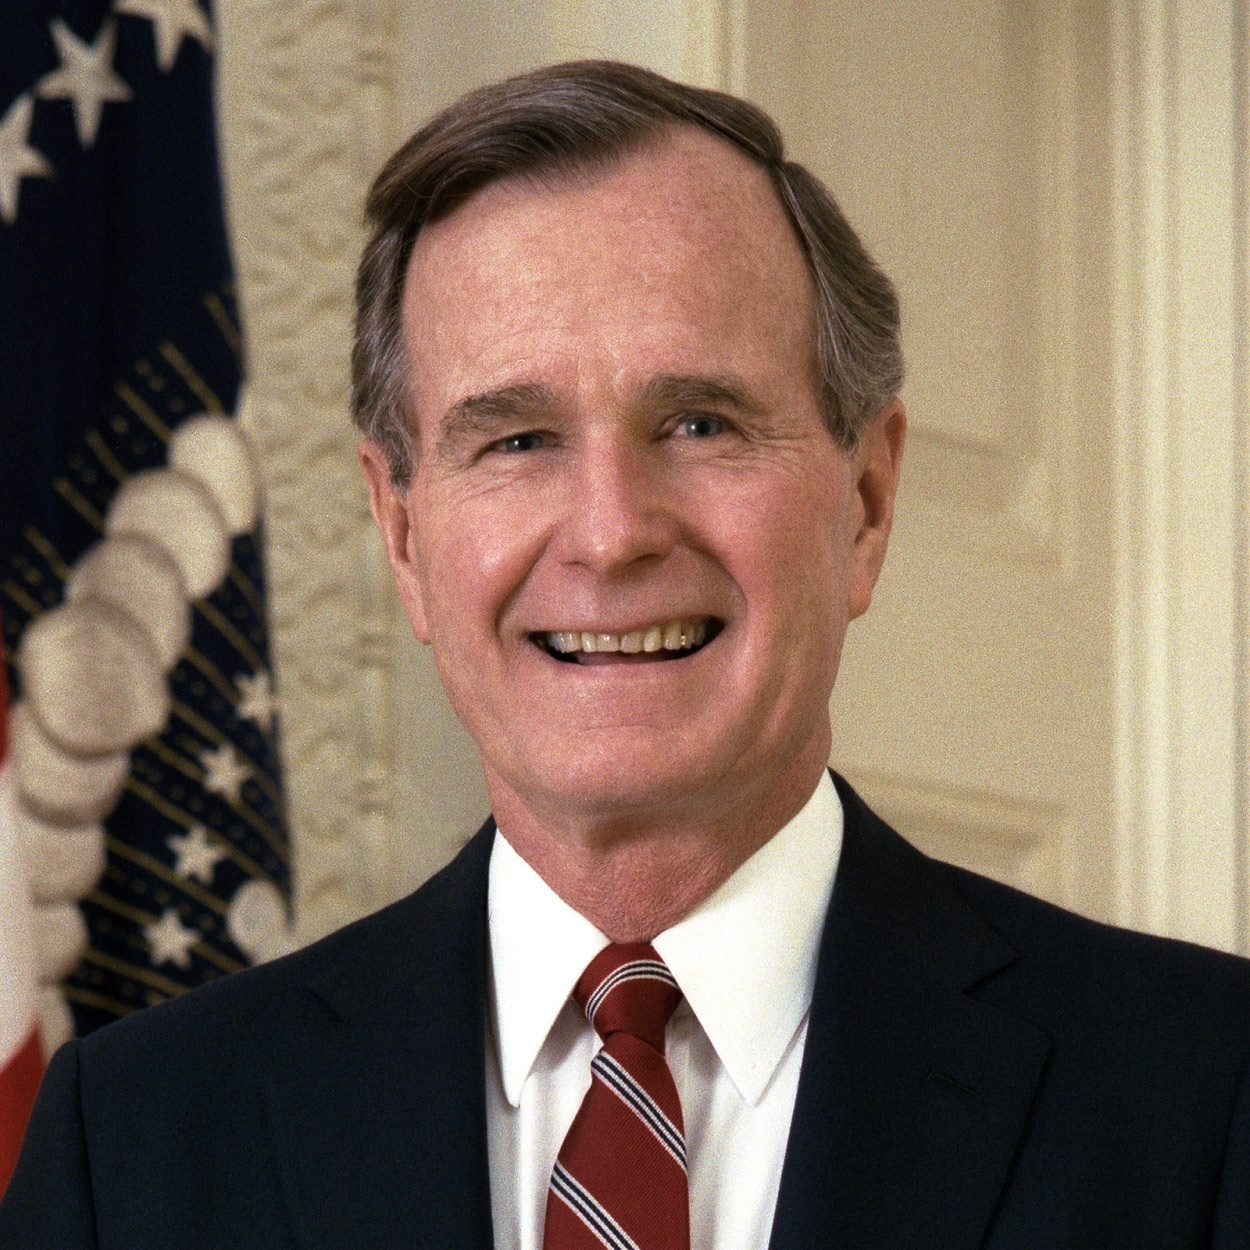 Portrait of George H. W. Bush, the 41st President of the United States